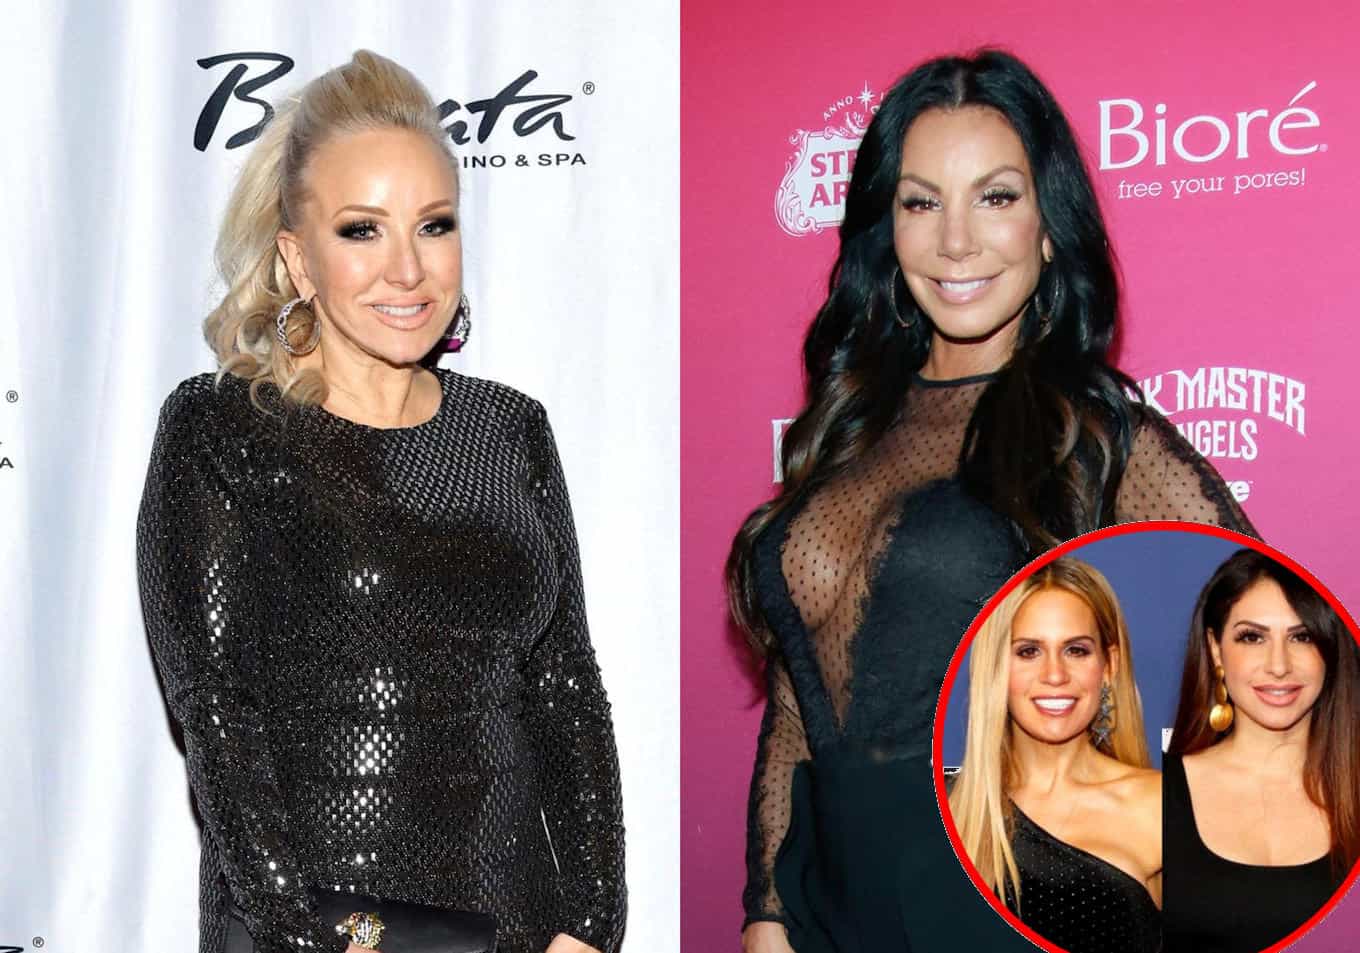 RHONJ's Margaret Josephs Slams Danielle Staub for "Horrific" Attack and Says She Nearly Broke Her Neck as Jennifer and Jackie Weigh In